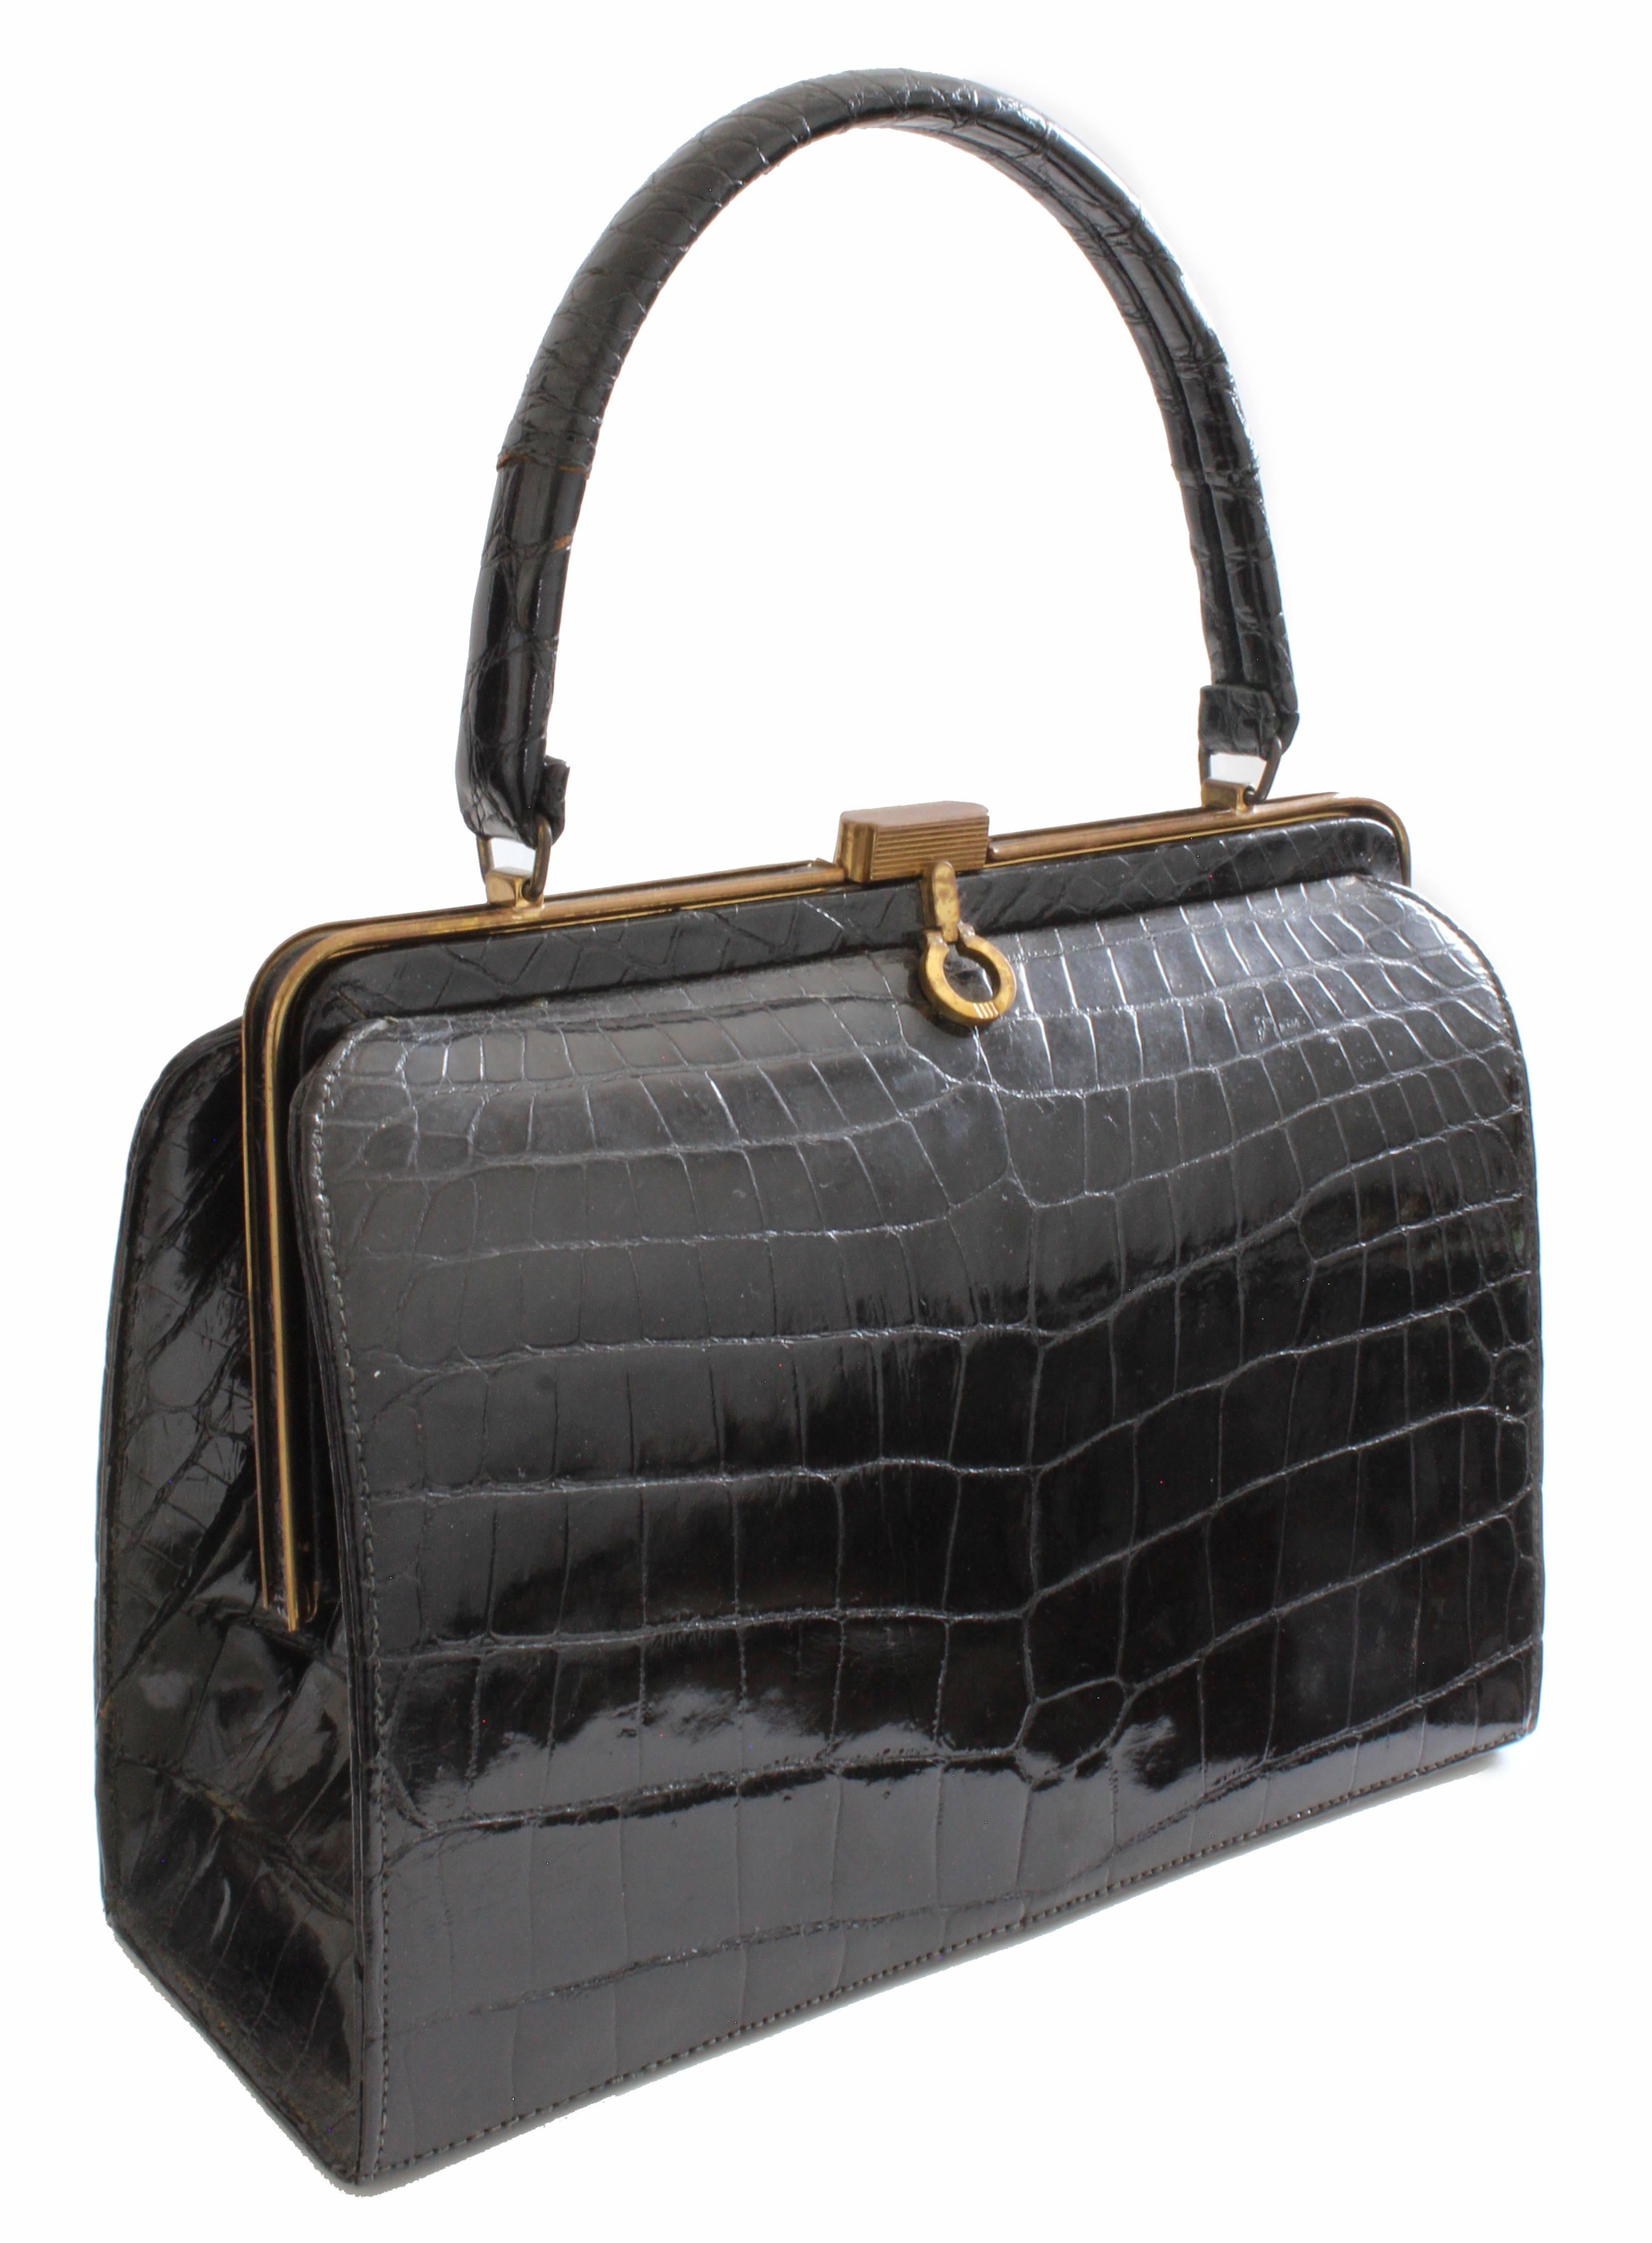 This vintage bag was made by Bellestone, most likely in the early 1960s.  Made from glossy black crocodile skins, it fastens with a gold metal clasp.  Lined in beige leatherette fabric, it features one zipper pocket and two flat open pockets.  Note